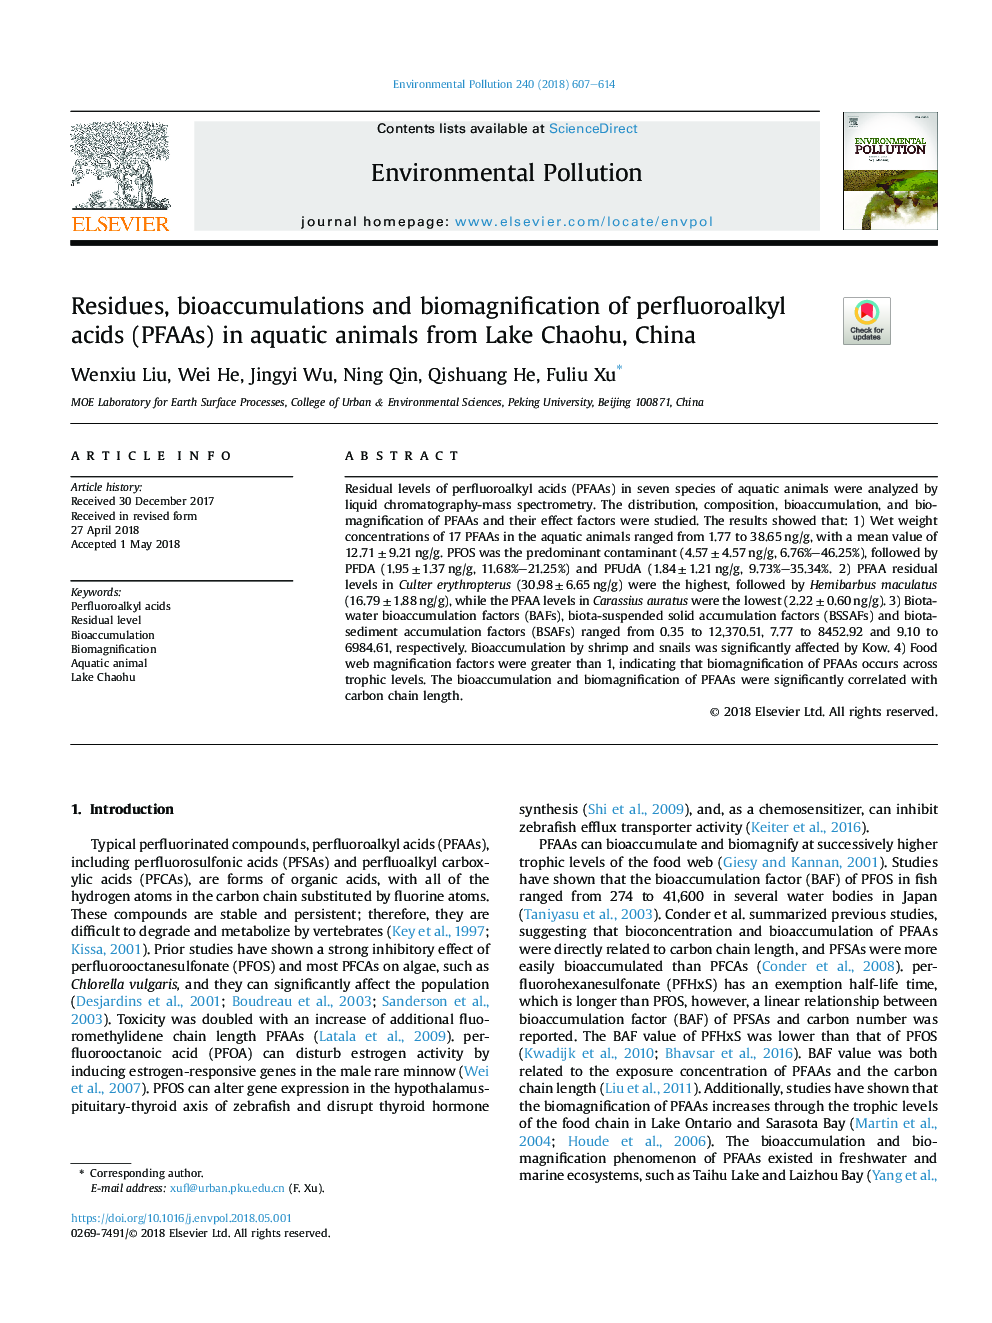 Residues, bioaccumulations and biomagnification of perfluoroalkyl acids (PFAAs) in aquatic animals from Lake Chaohu, China